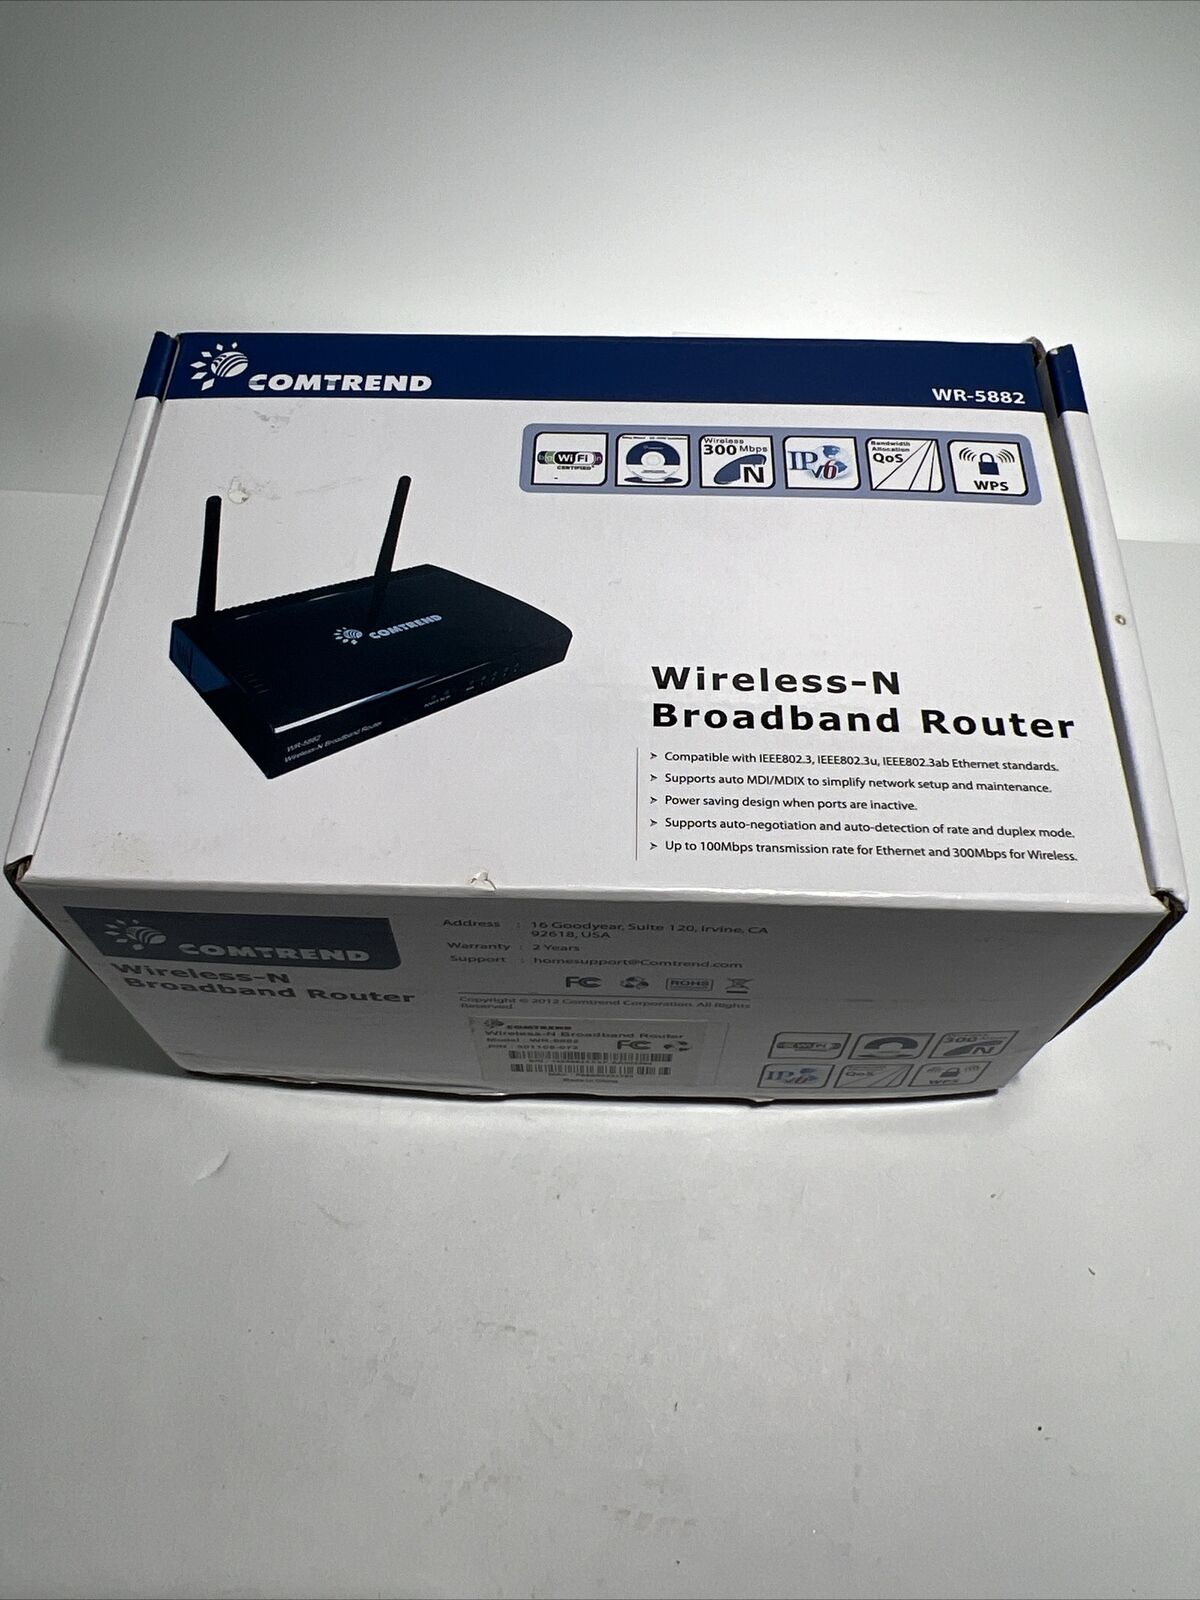 Comtrend WR-5882 Wireless-N Broadband 300 Mbps Router